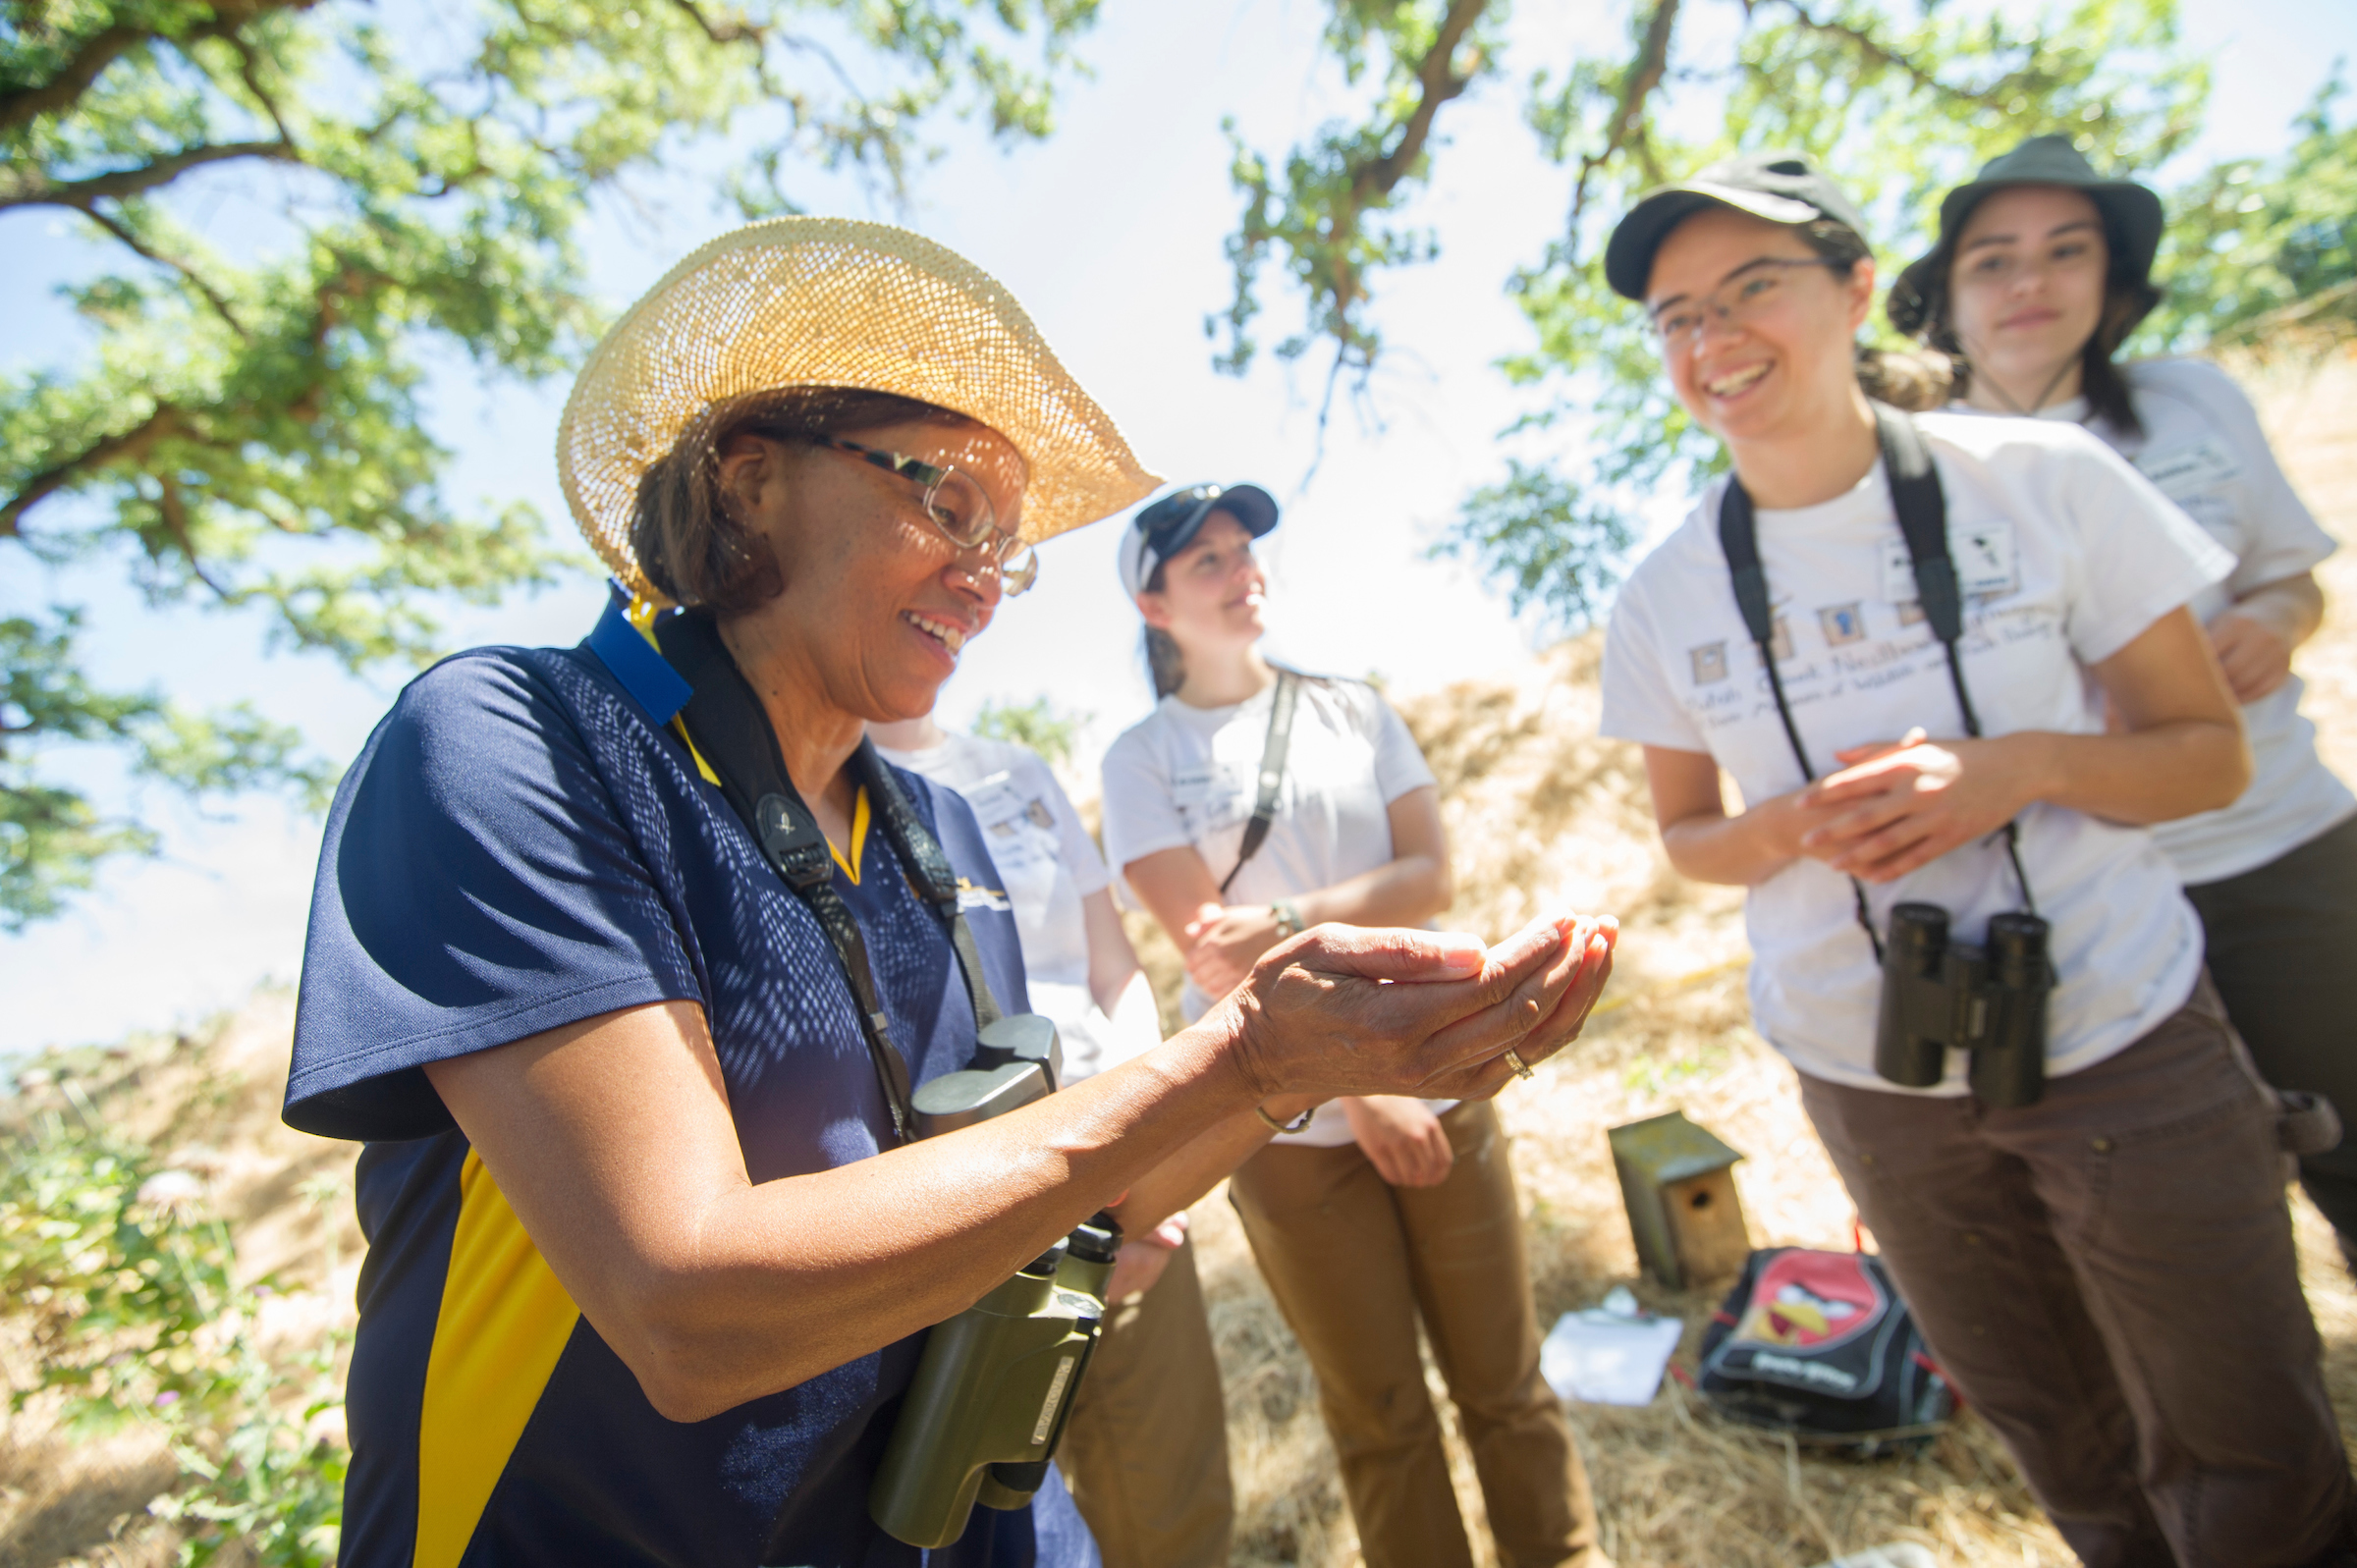 Woman wearing a hat in a field holds a bird with students looking 